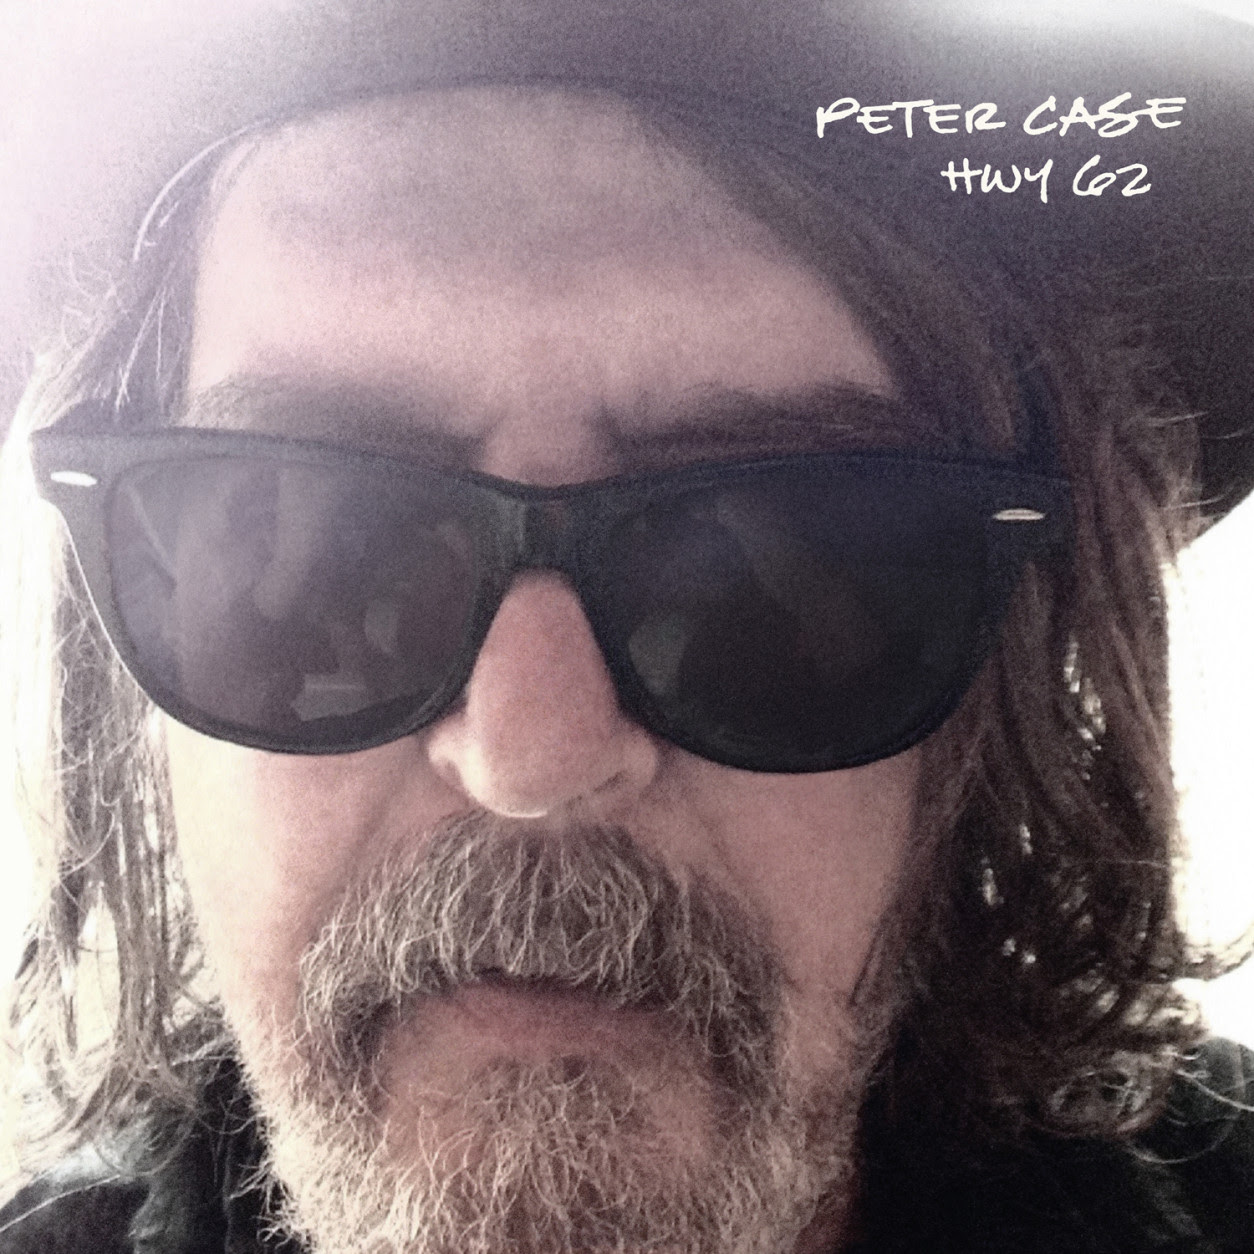 The Paul Zollo Blog: Reflections On New Albums From Peter Case, Athena, Thee Holy Brothers